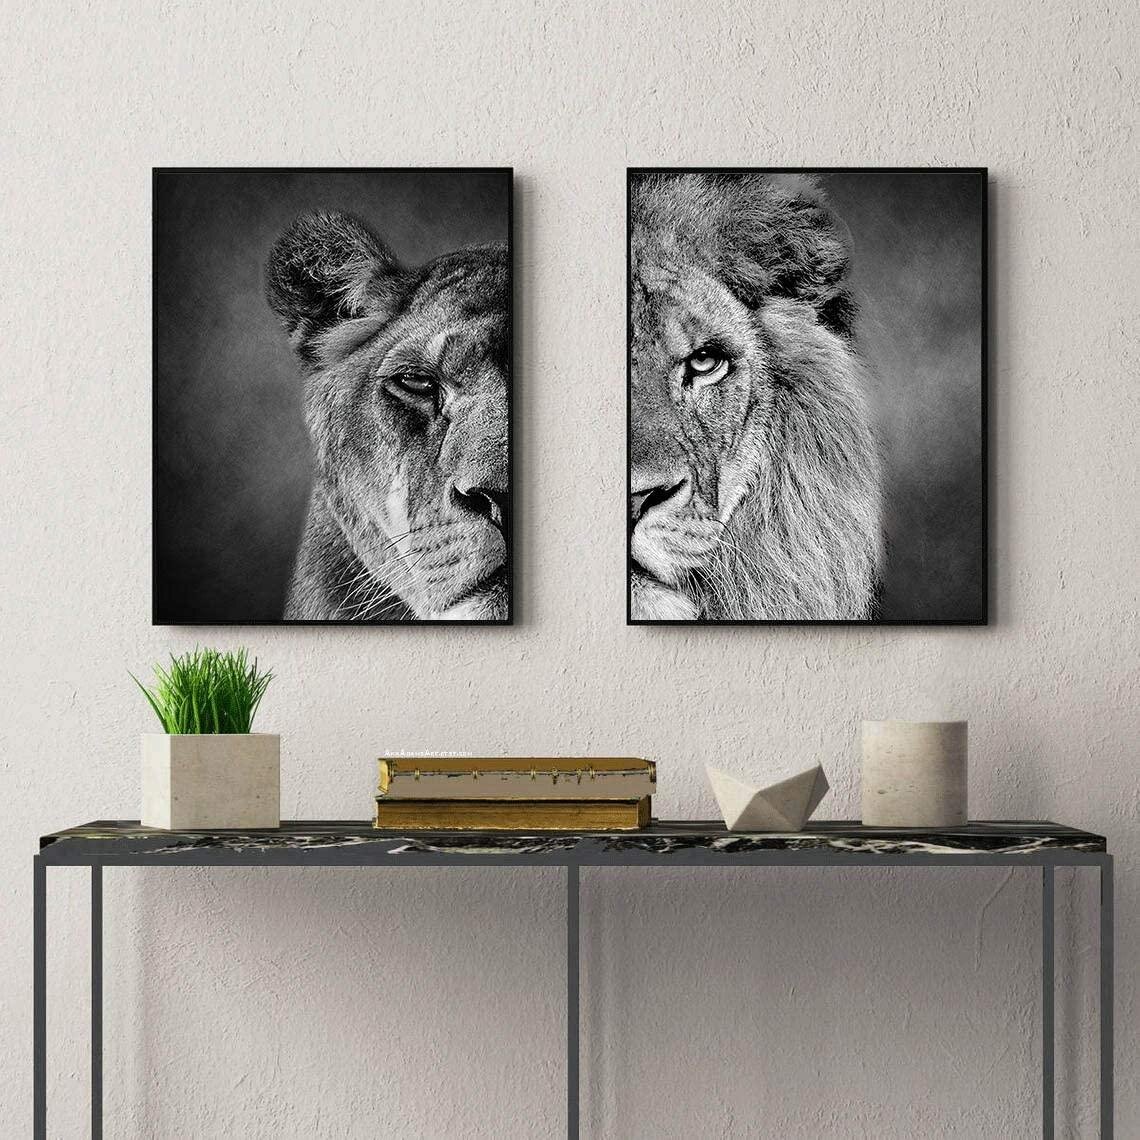 UNFRAMED 2 Piece Canvas Prints Man and Woman Wall Art Home Decor Painting 